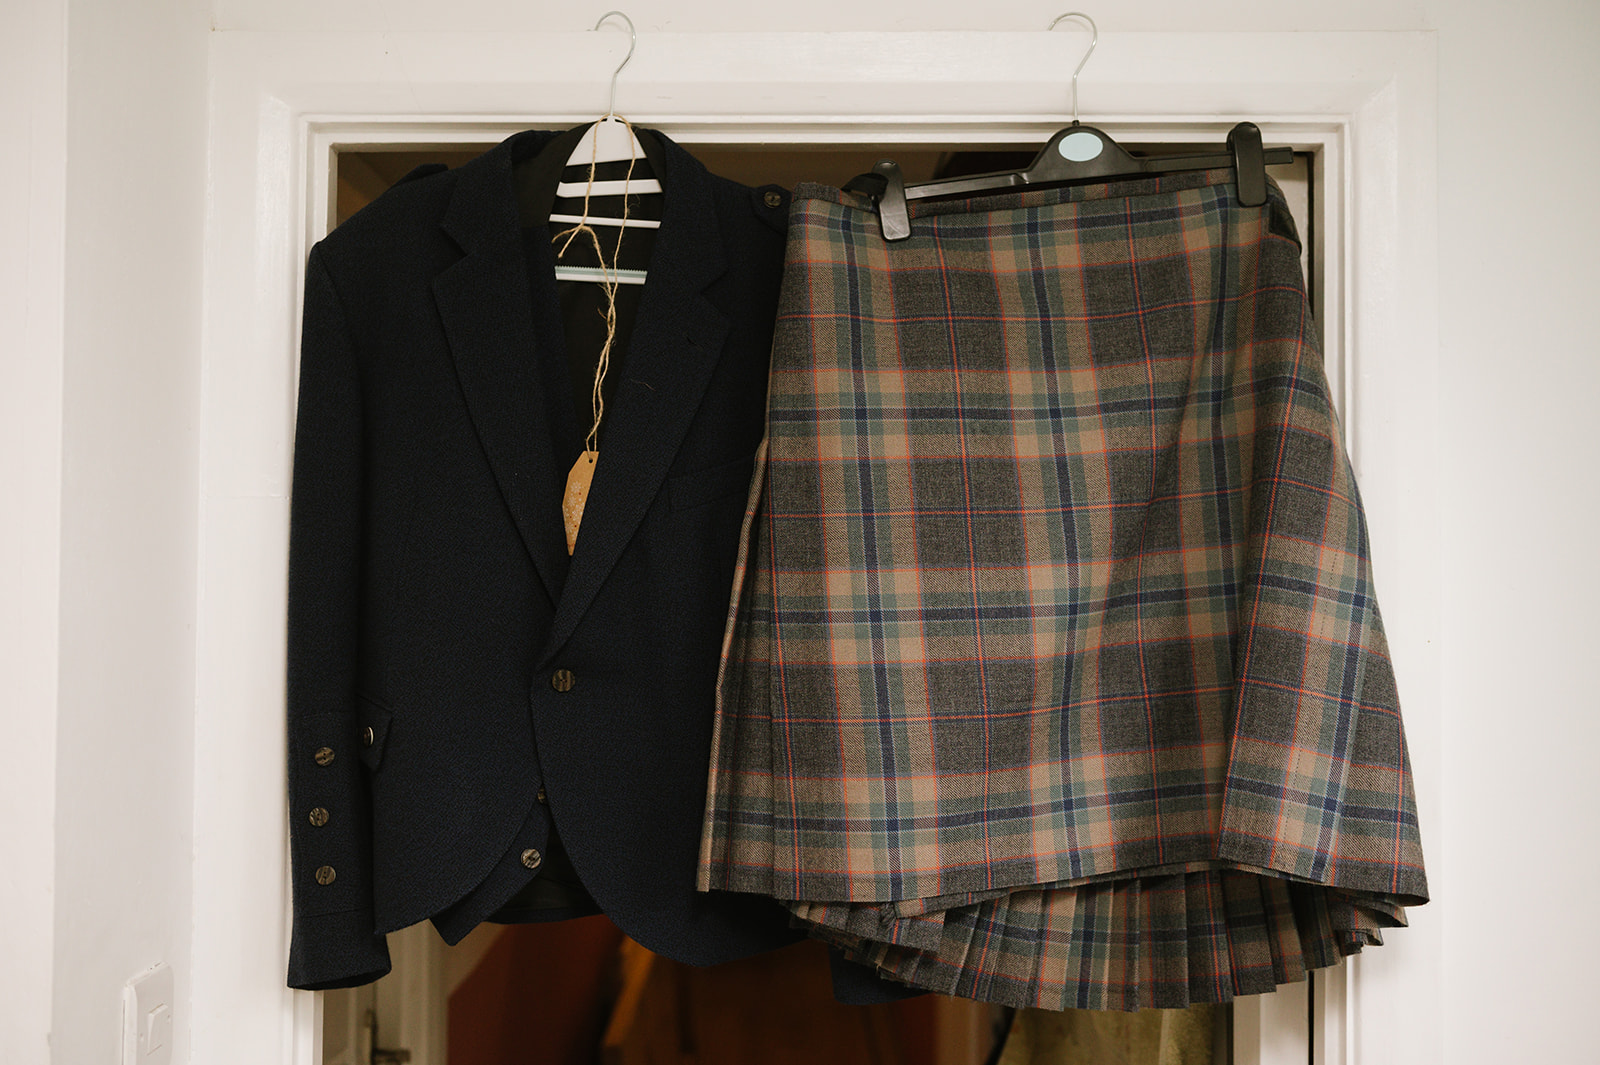 The groom's kilt hanging up next to his jacket